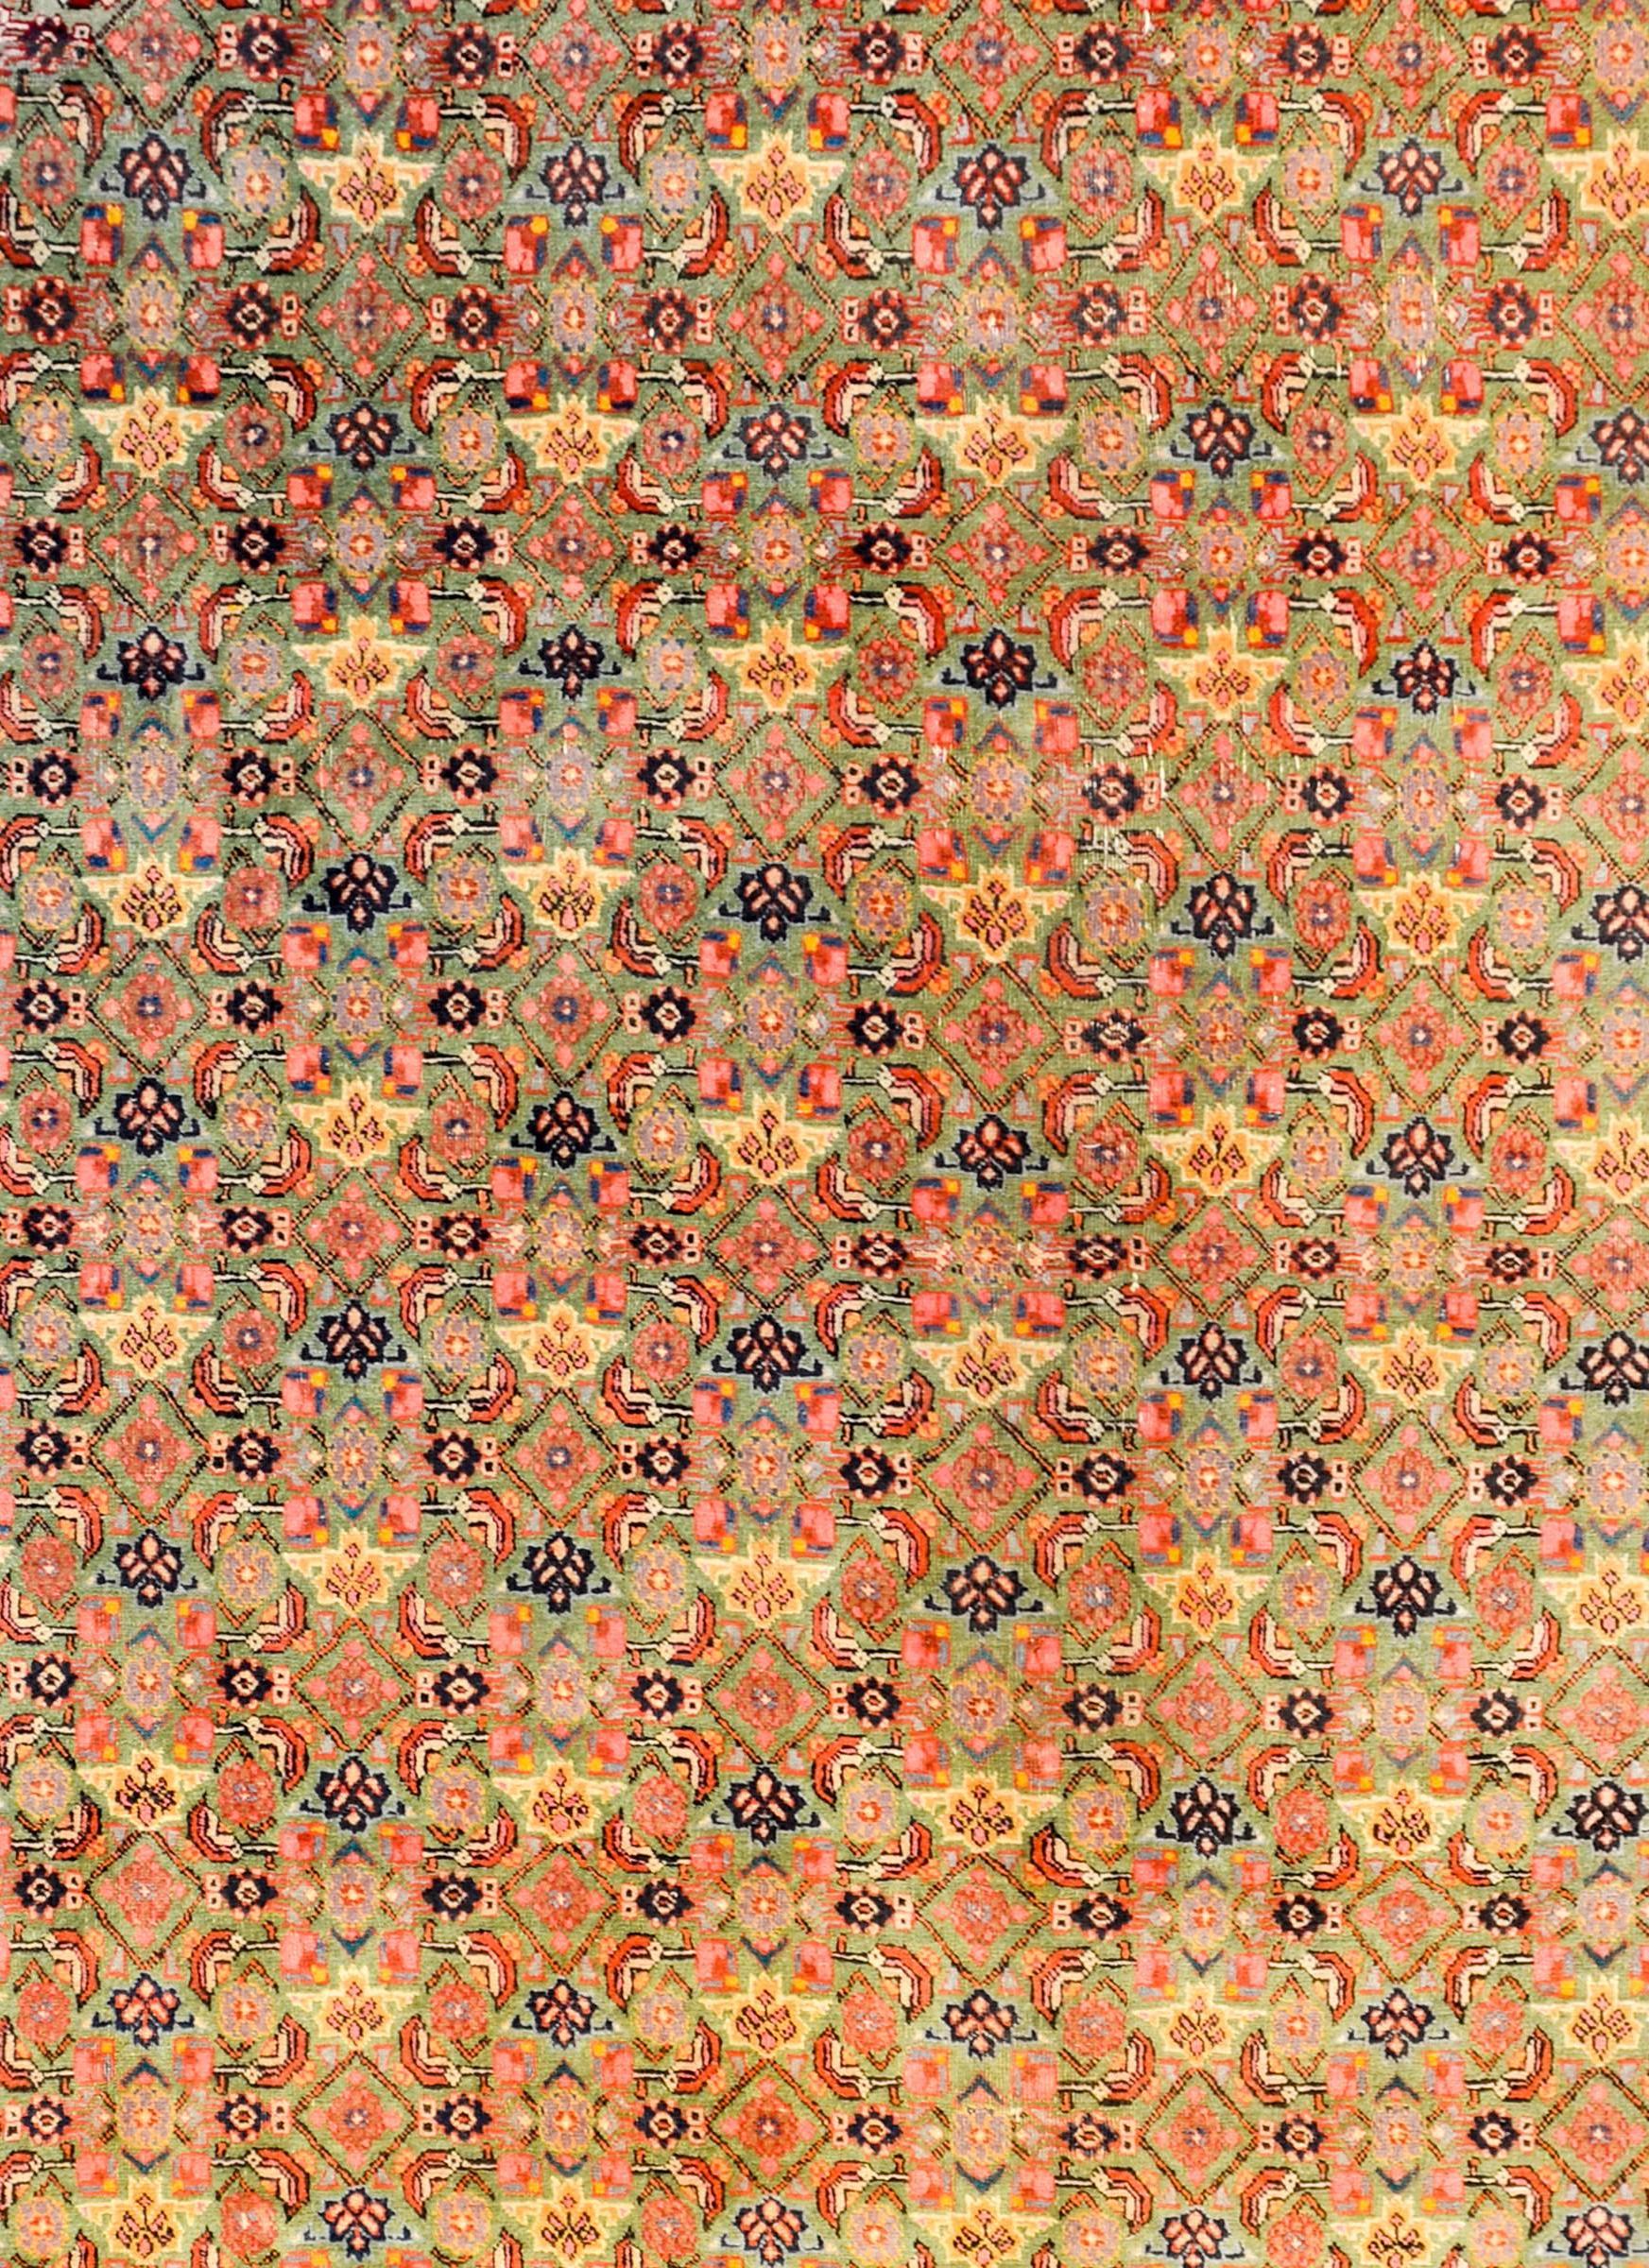 A wonderful early 20th century Persian Bidjar rug with an all-over lattice floral pattern woven in crimson, pink, gold, and indigo, on a beautiful lime green background. The border is unbelievable, with a unique large-scale stylized floral pattern